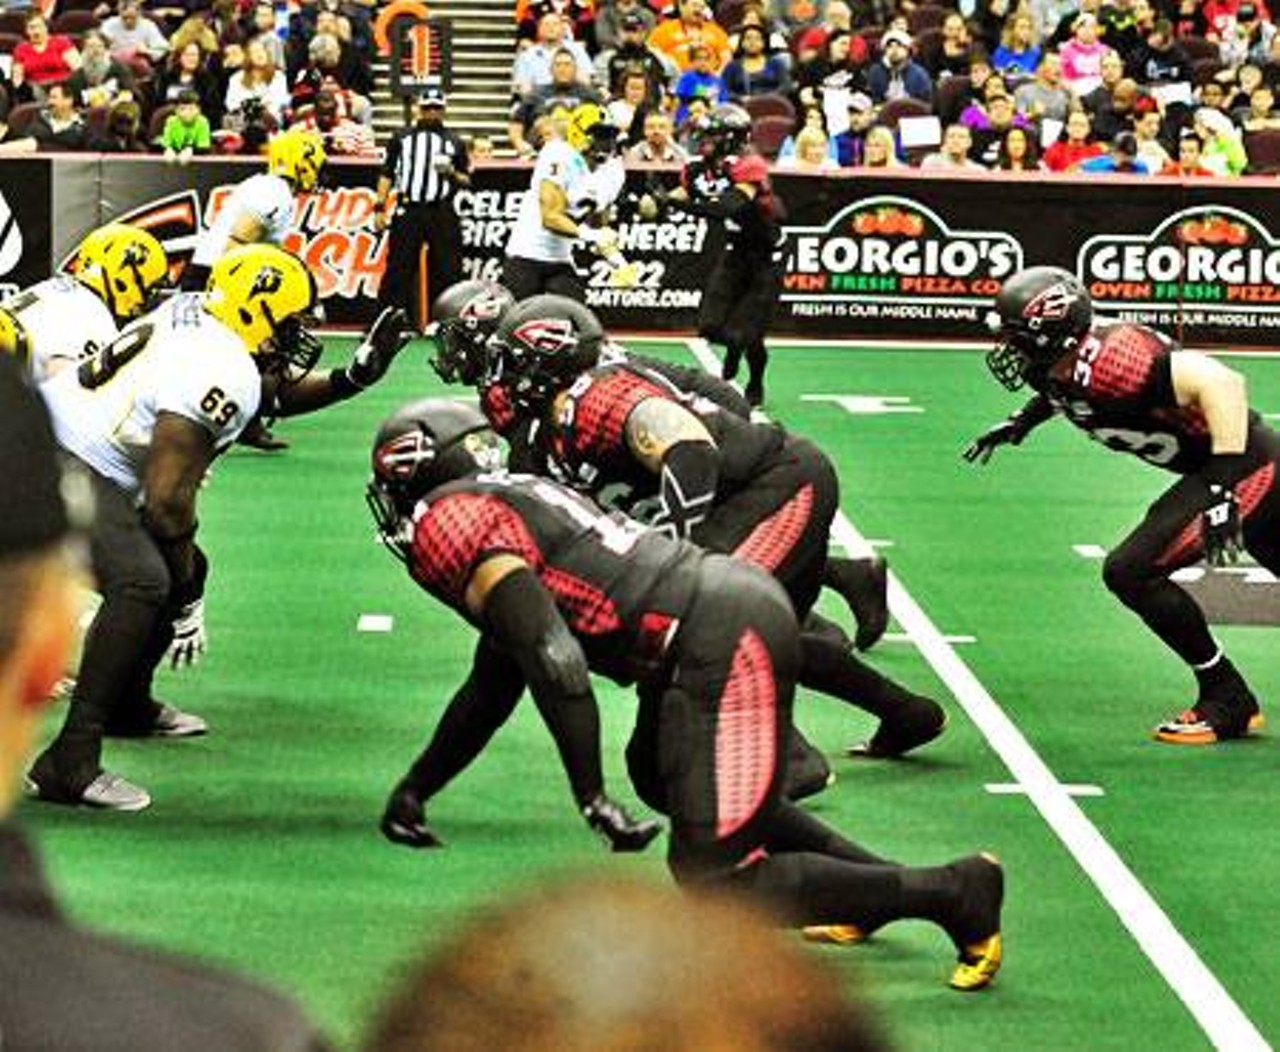 The Cleveland Gladiators are dominating the Arena Football League, folks. Though the AFL doesn’t have the following of the NFL (YET!!!) the Gladiators are 7-0 and, along with the Arizona Rattlers, are the only undefeated team in the country. Gladiator, of course, is now available instantly on Netflix, so it’s reasonable to assume the team has been channeling Maximus in a pretty regular way. Tonight, they take on the Philadelphia Soul at the Quicken Loans Arena. With a 50-yard field, look for lots of touchdowns, athletic interceptions and crazy trick plays. Tickets starts at $10 — incredible bang for your buck. (Sam Allard)